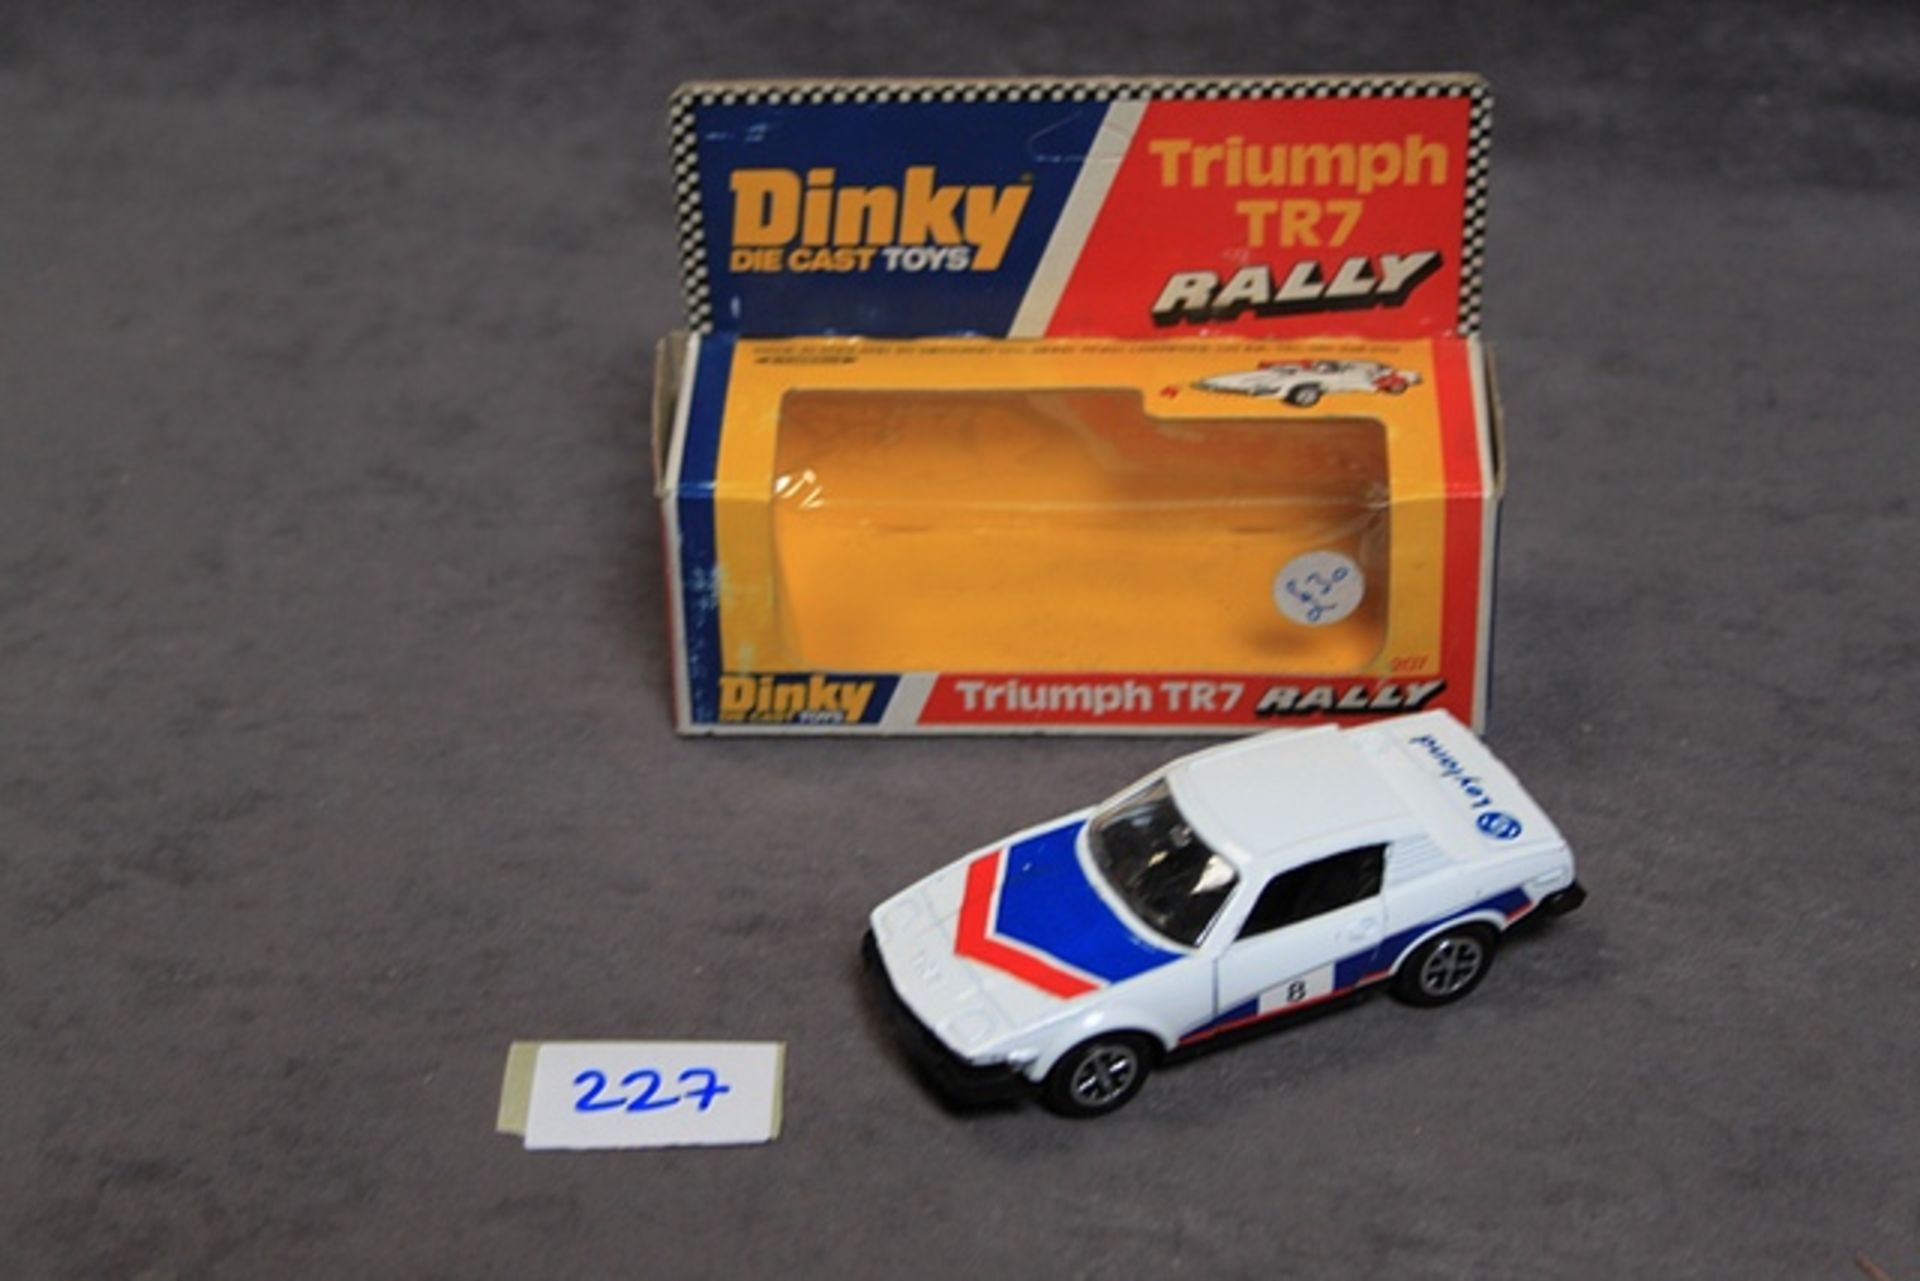 Mint Dinky Diecast #207 Triumph TR Rally White/Blue/Red Racing Number #8, Leyland Logo in Near mint - Image 2 of 2